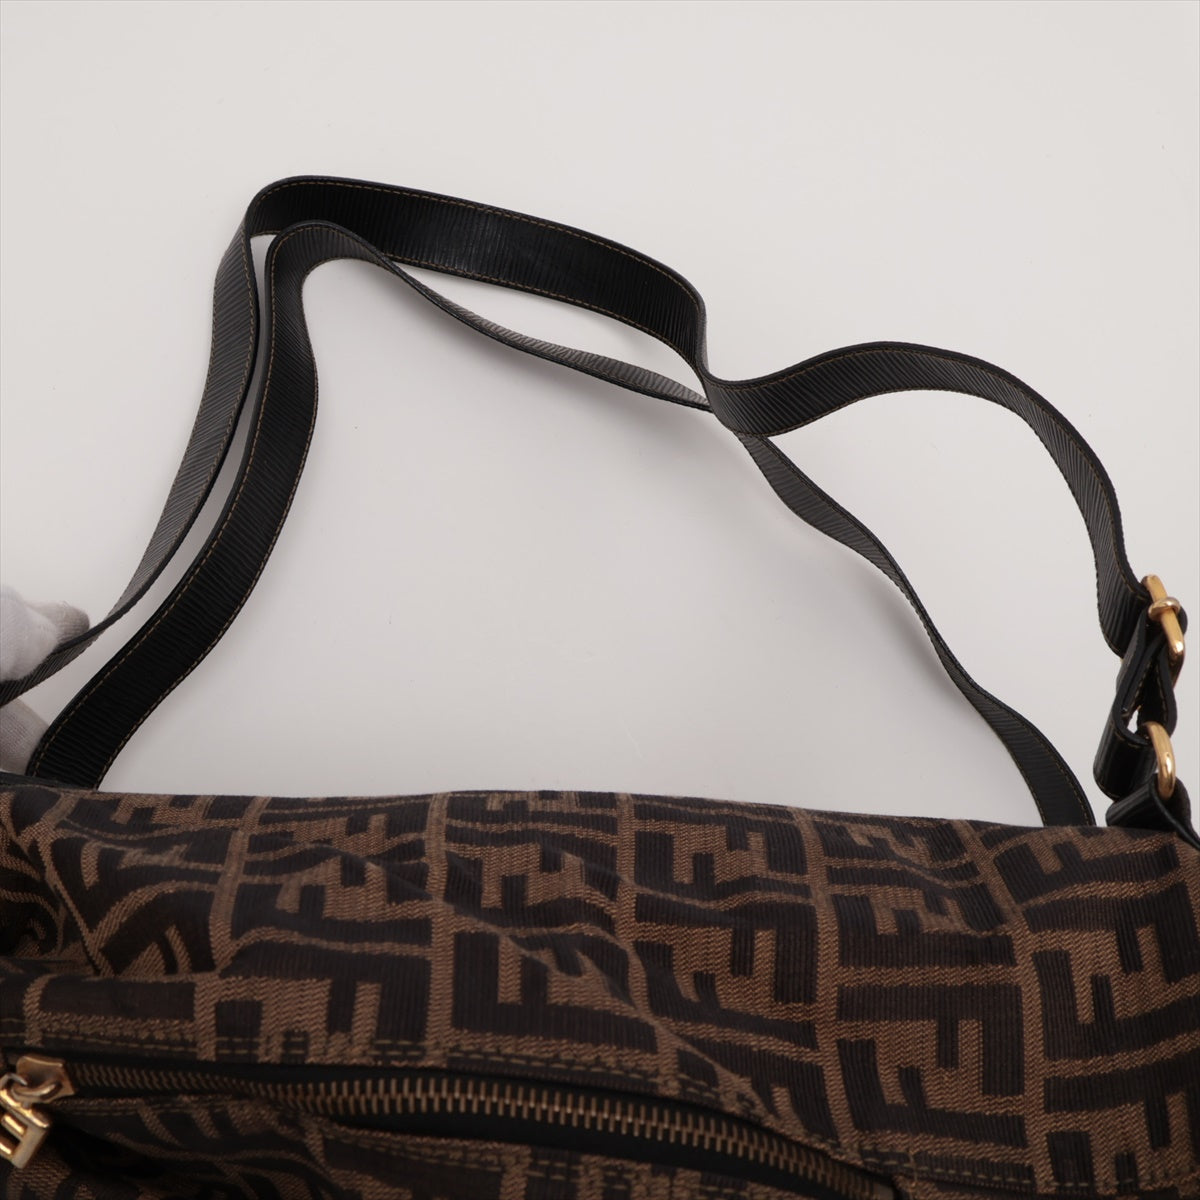 Fendi Zucca Canvas  Leather Backpack/Rack Brown Fence